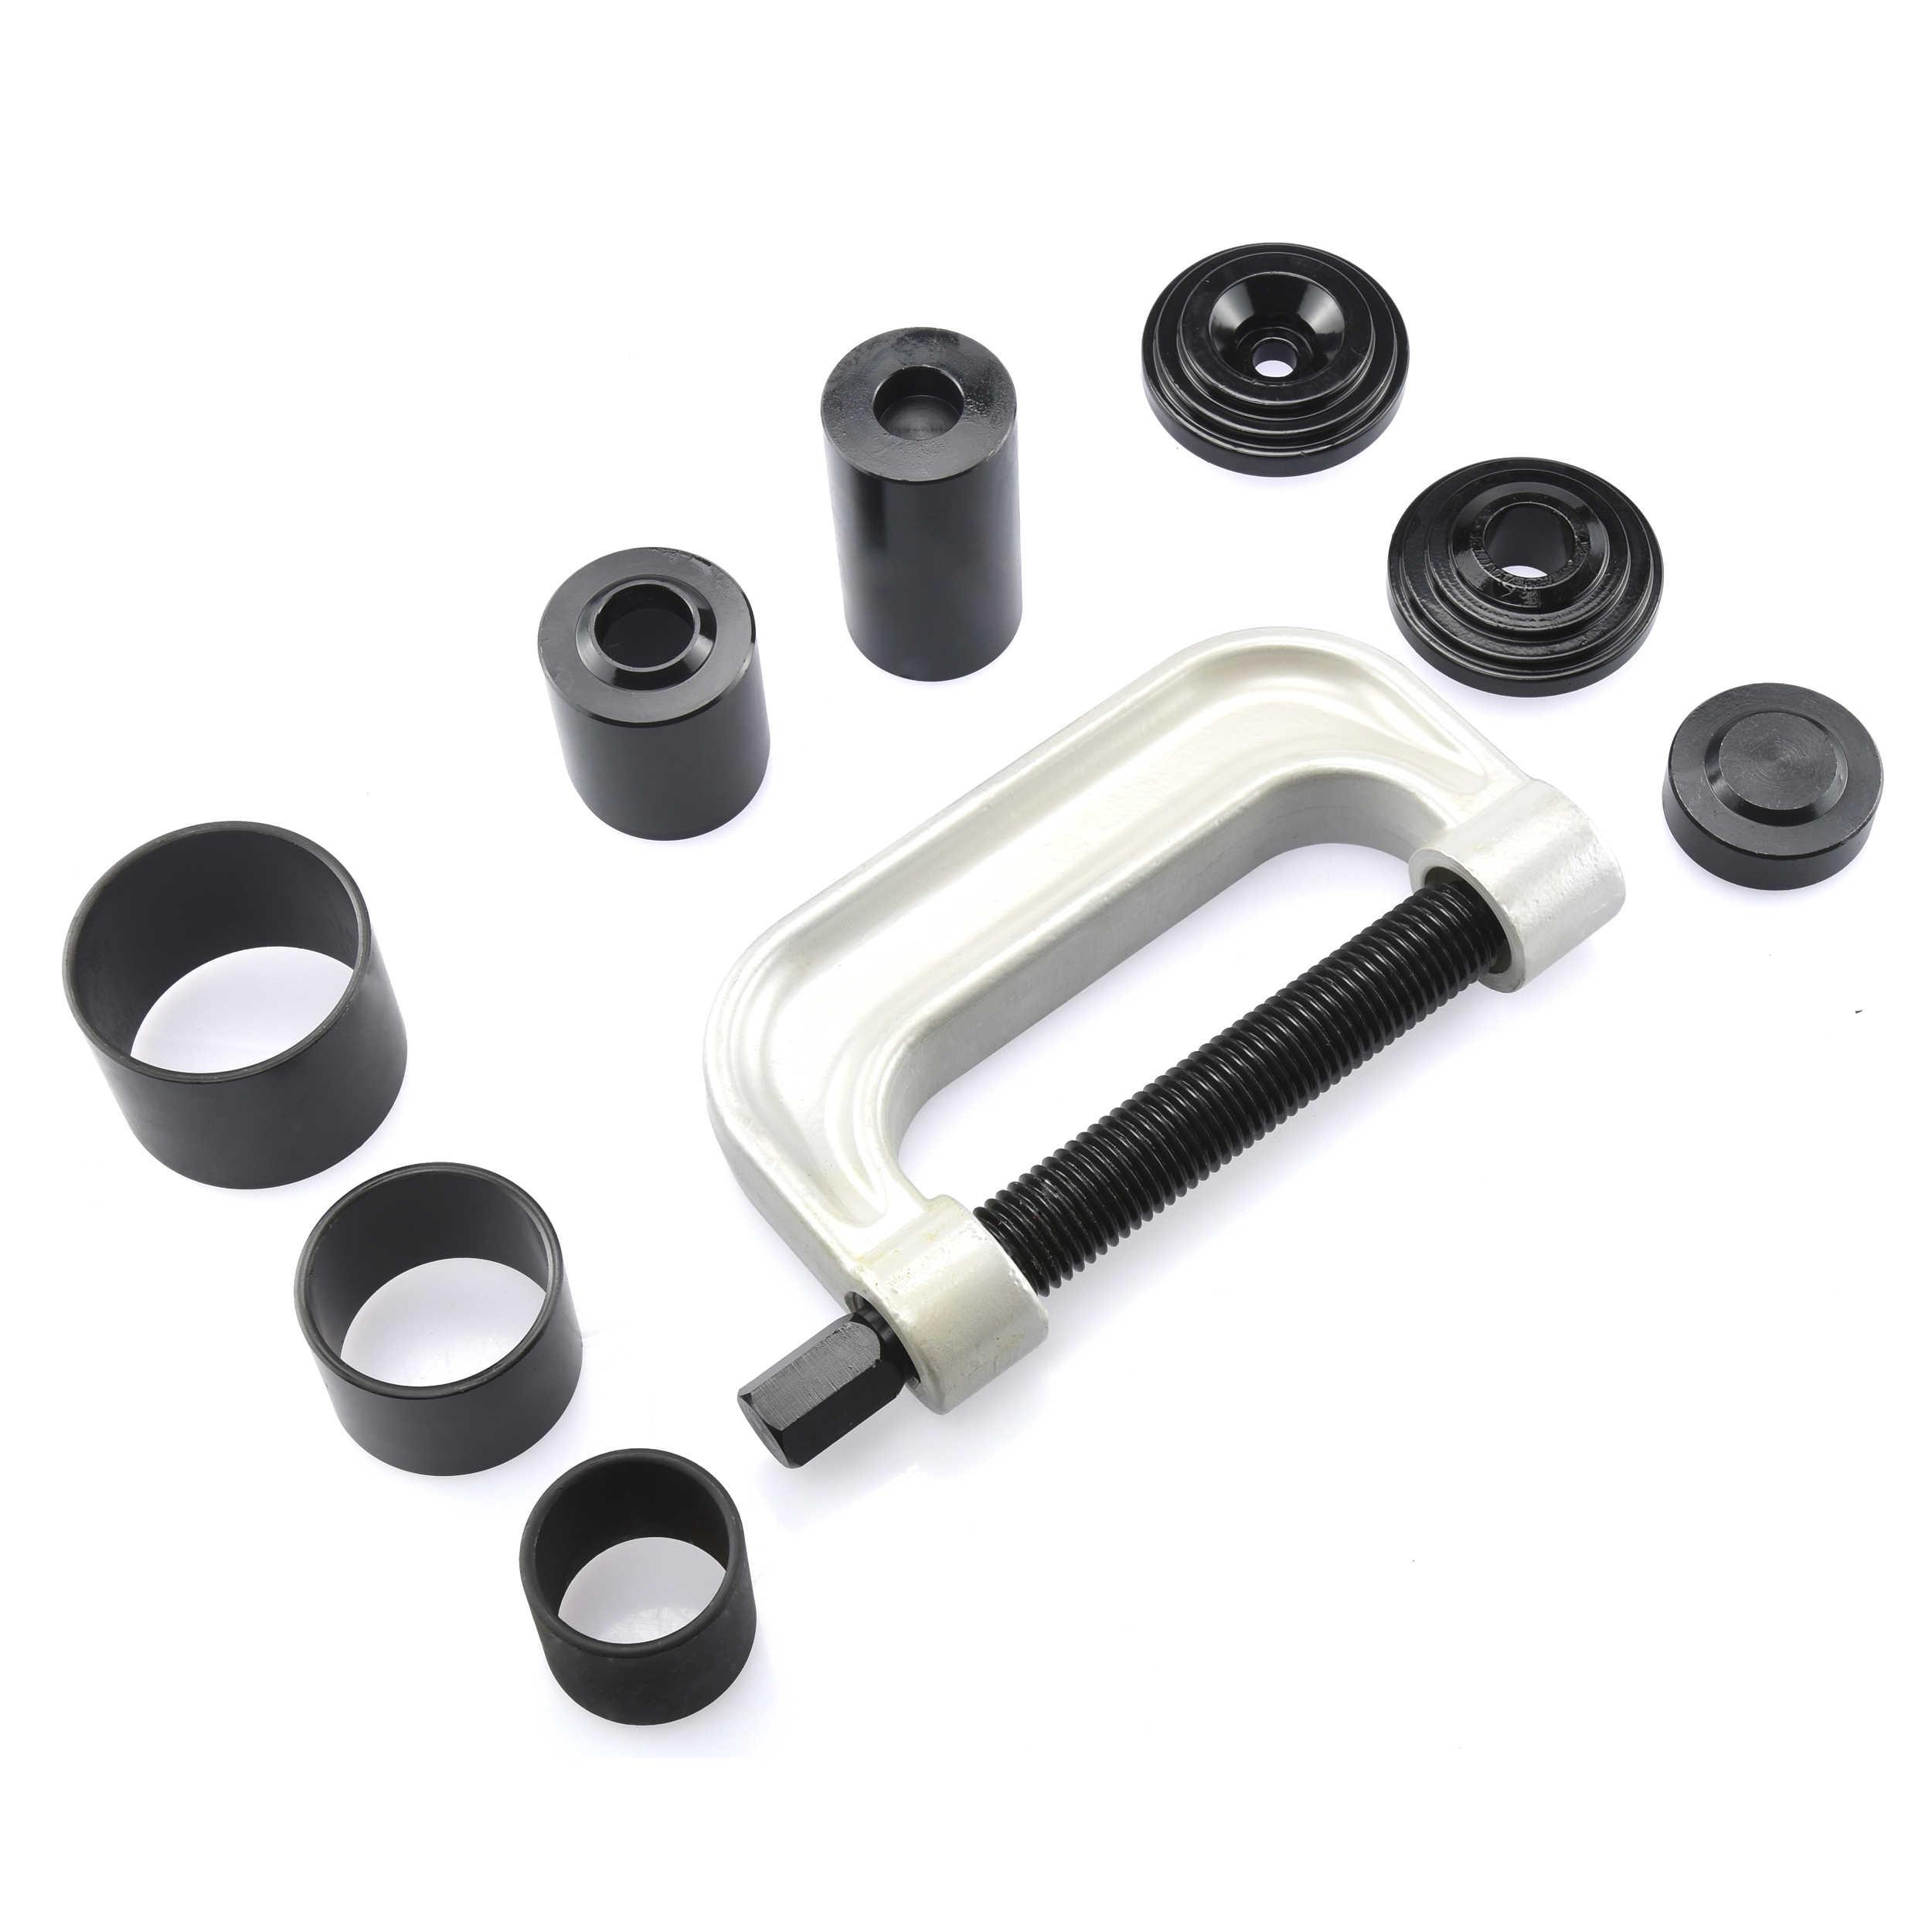 Neiko 20597A 4-in-1 Automotive Ball Joint Service Kit